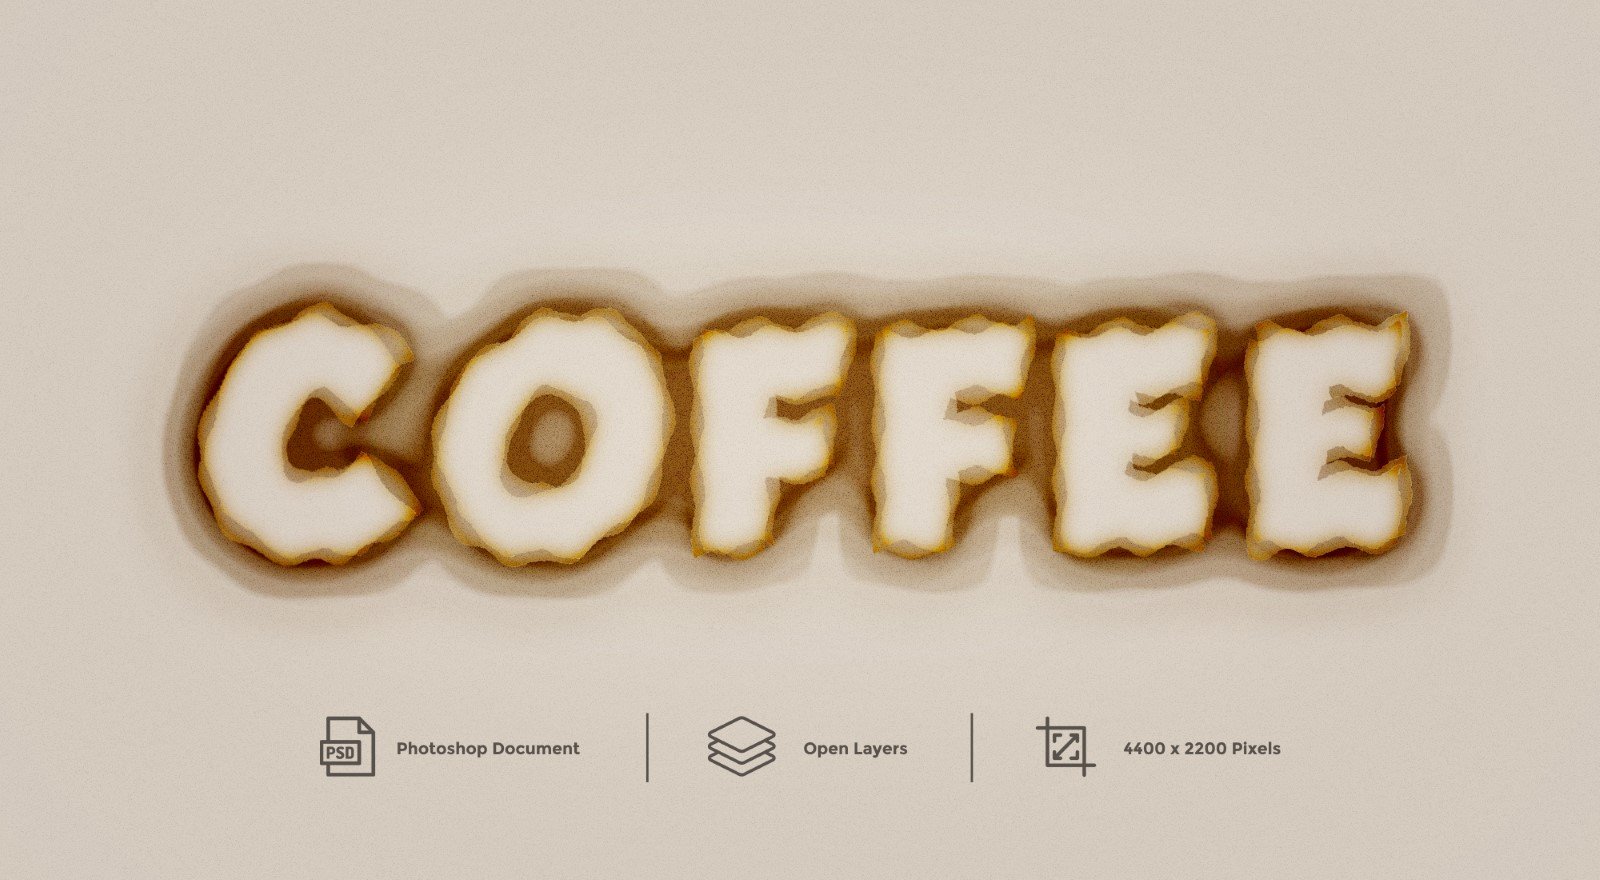 Coffee Text Effect Layer Style - Illustration